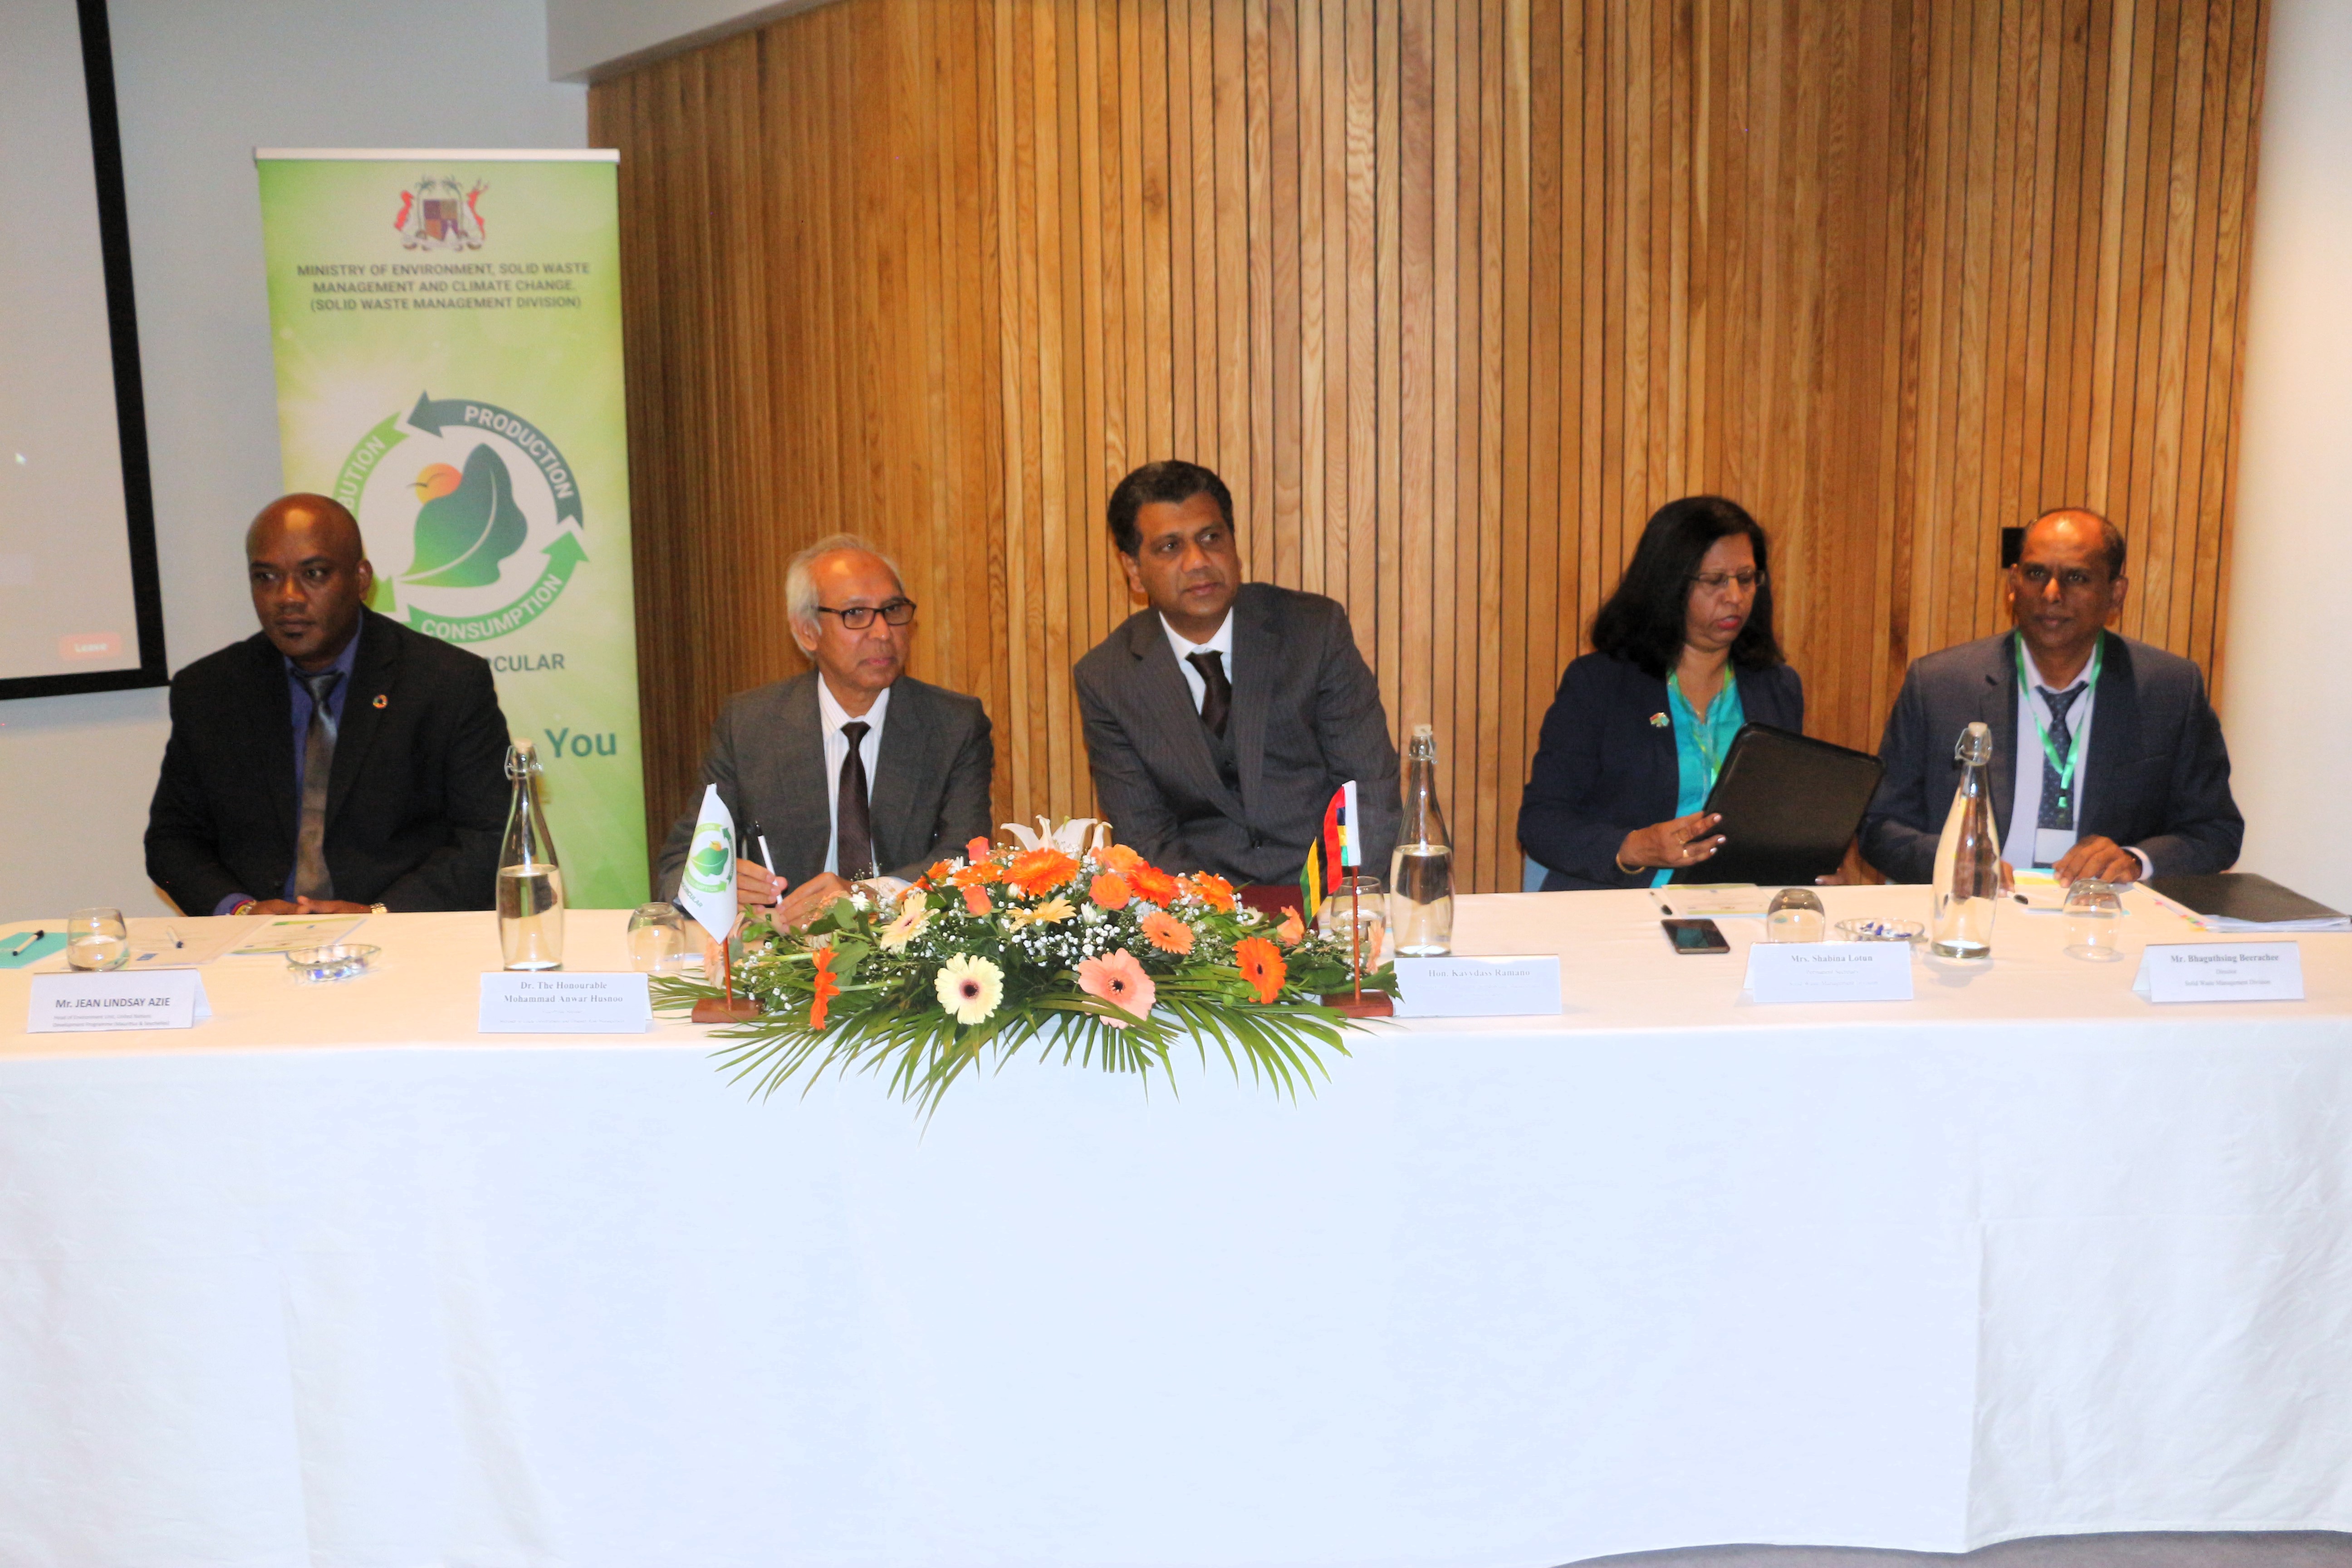 From left to right: Jean-Lindsay Azie, UNDP Environment Department Team Leader; Dr the Honourable Anwar Husnoo, Vice-Prime Minister, Minister of Local Government and Disaster Risk Management; the honourable Kavydass Ramano, Minister of Environment, Solid Waste Management and Climate Change; Mrs Shabeena Lotun, Permanent Secretary- Solid Waste Management Division and Mr Bhaguthsing Beerachee, Director, Solid Waste Management Division.